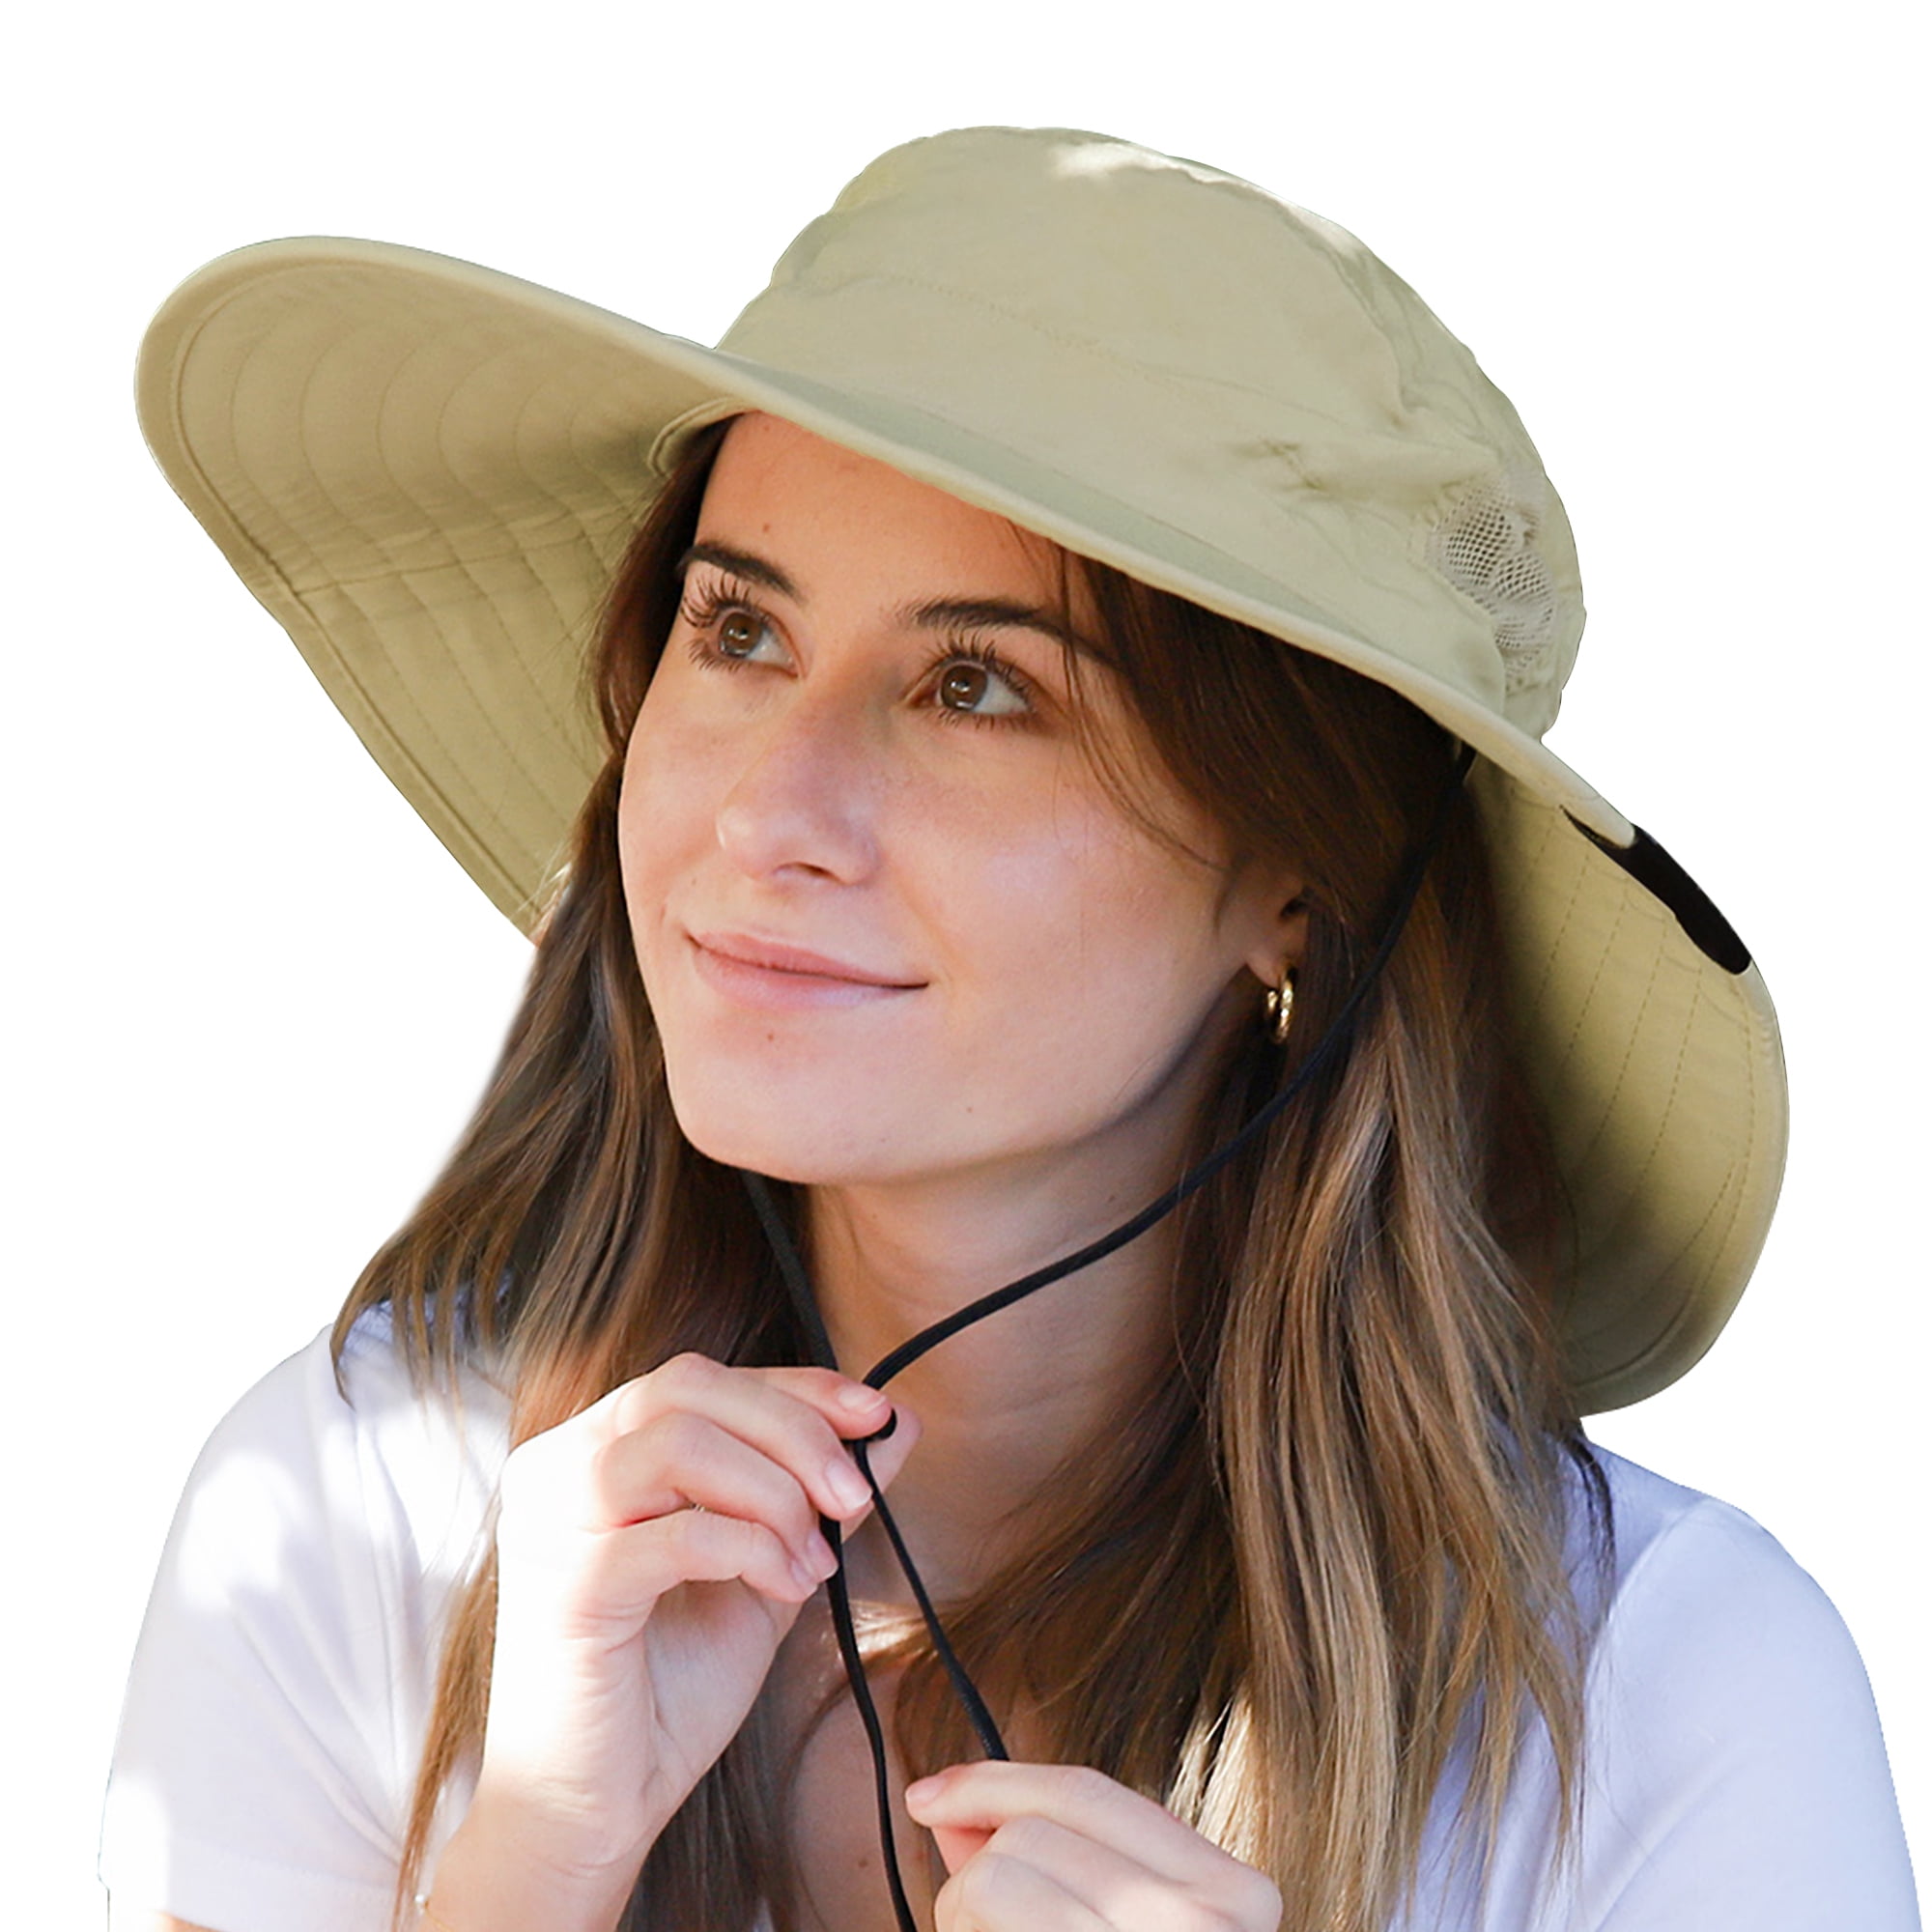 Women's Sun Hat with Wide Brim Neck Flap, Fishing Safari Hat for Outdoor  Hiking Camping Gardening Lawn Field Work 